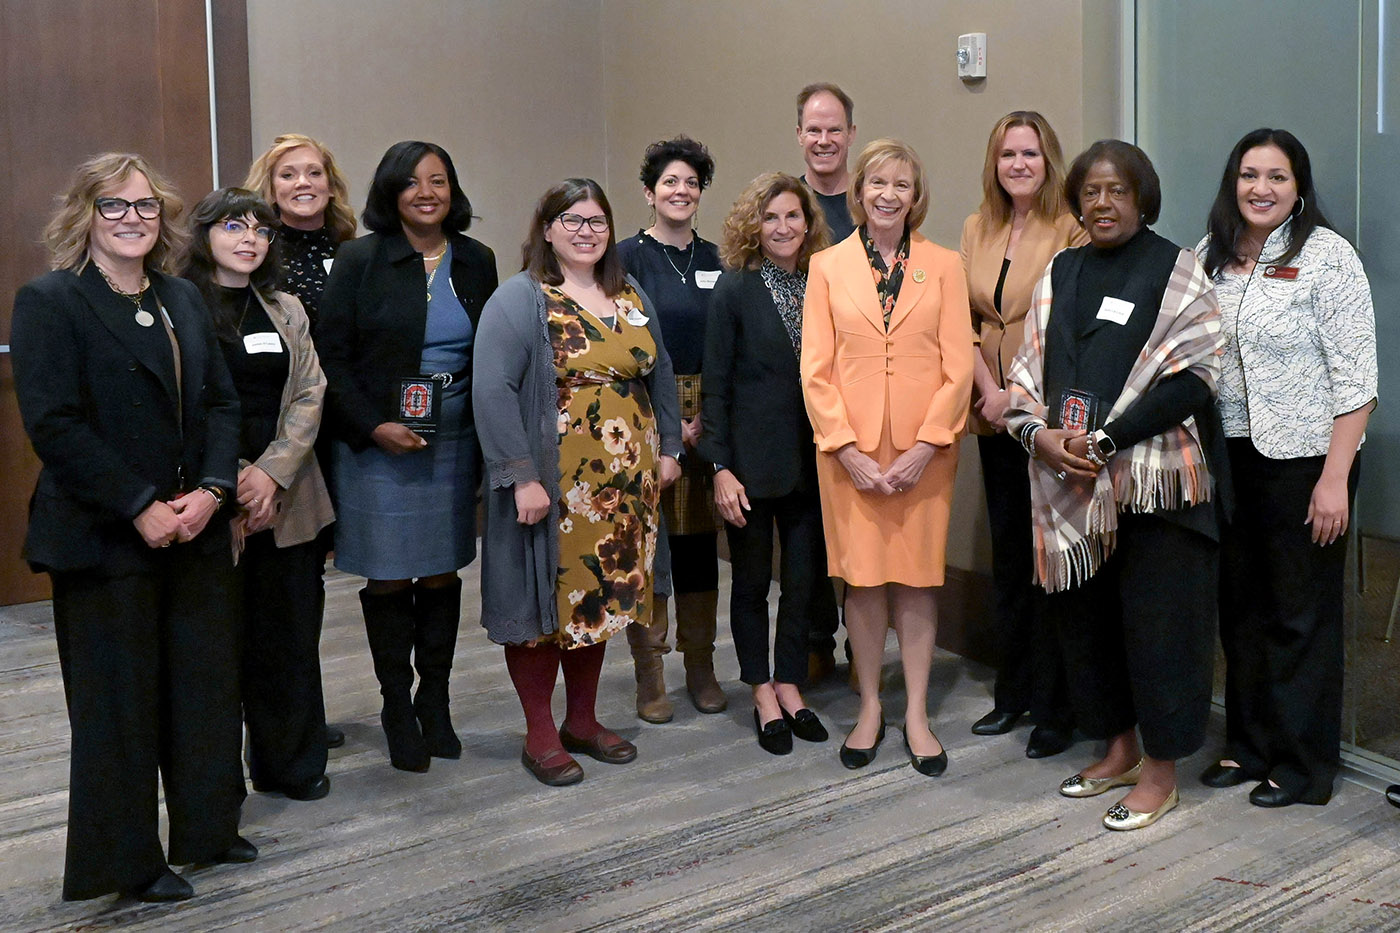 A group photograph of the speakers and award winners at the 2023 Crane Center Symposium on Children. There are 12 individuals in the photograph, all of whom are looking at the camera and smiling.